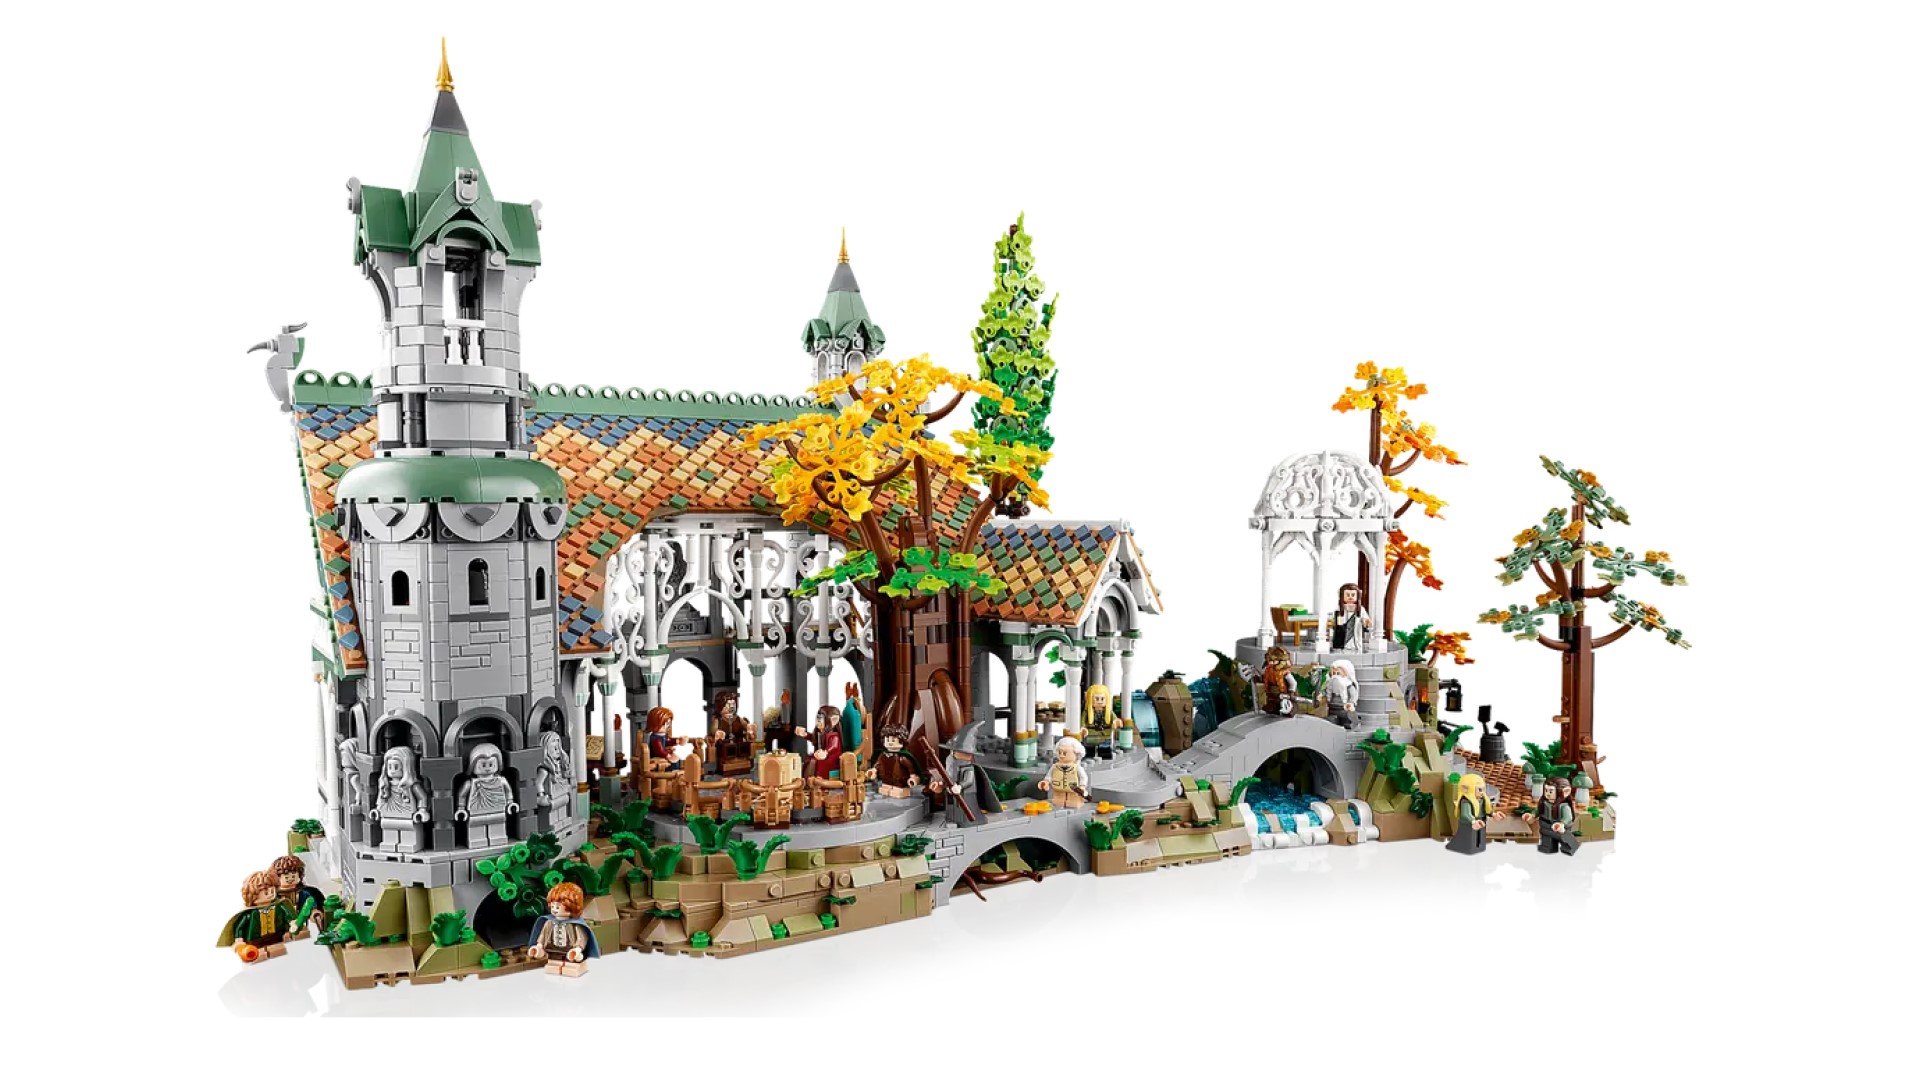 Best Lego sets - the Lego Lord of the Rings Rivendell set.